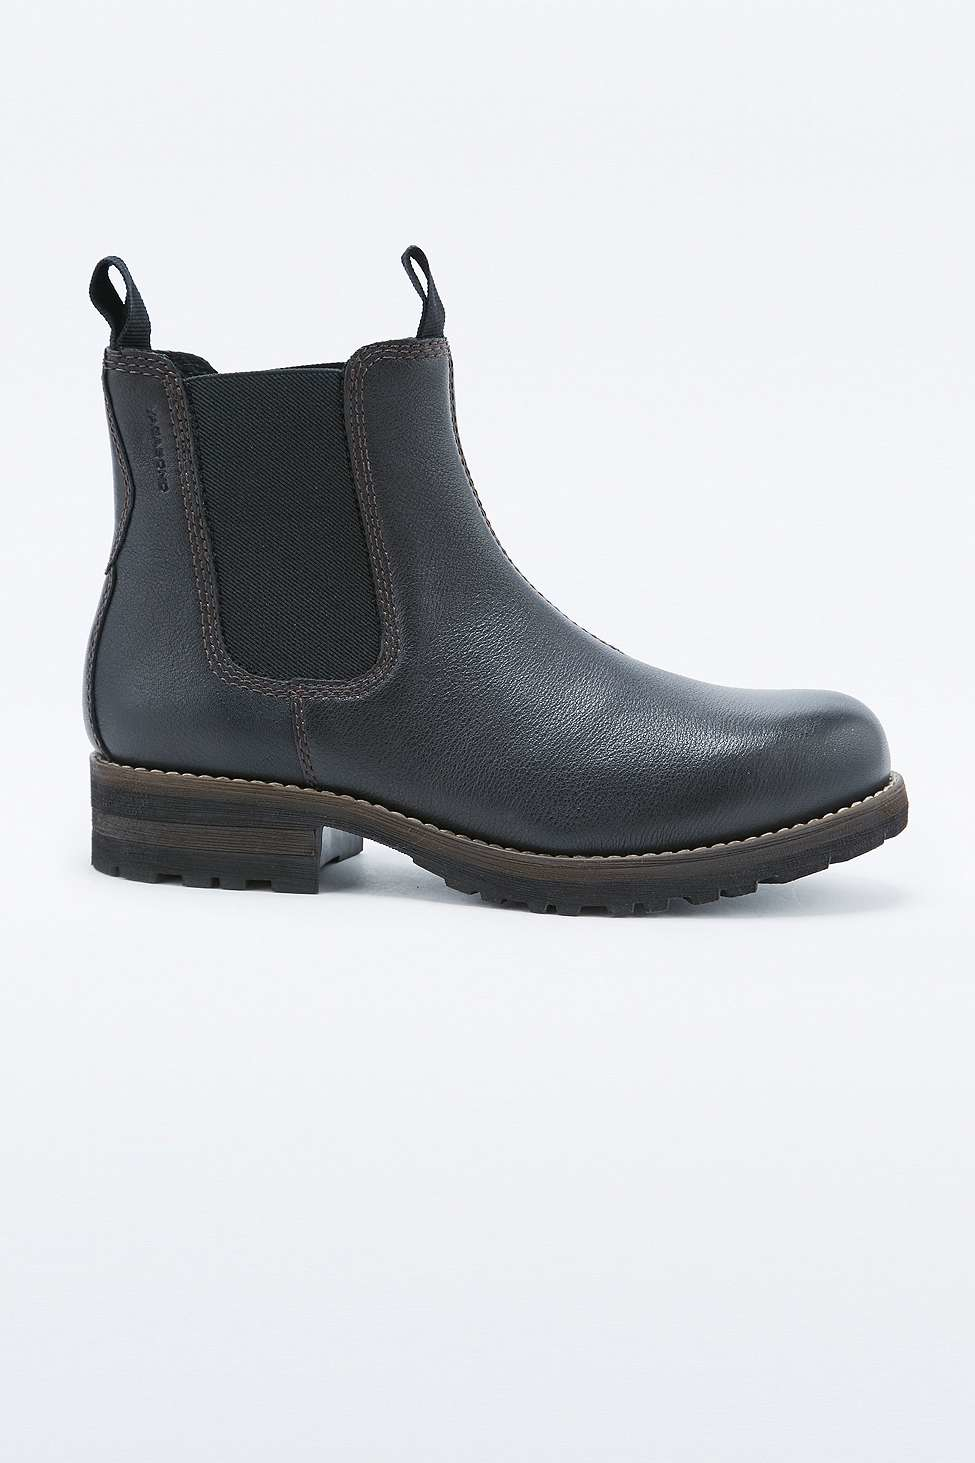 Vagabond Leather Cathy Black Chelsea Ankle Boots - Lyst